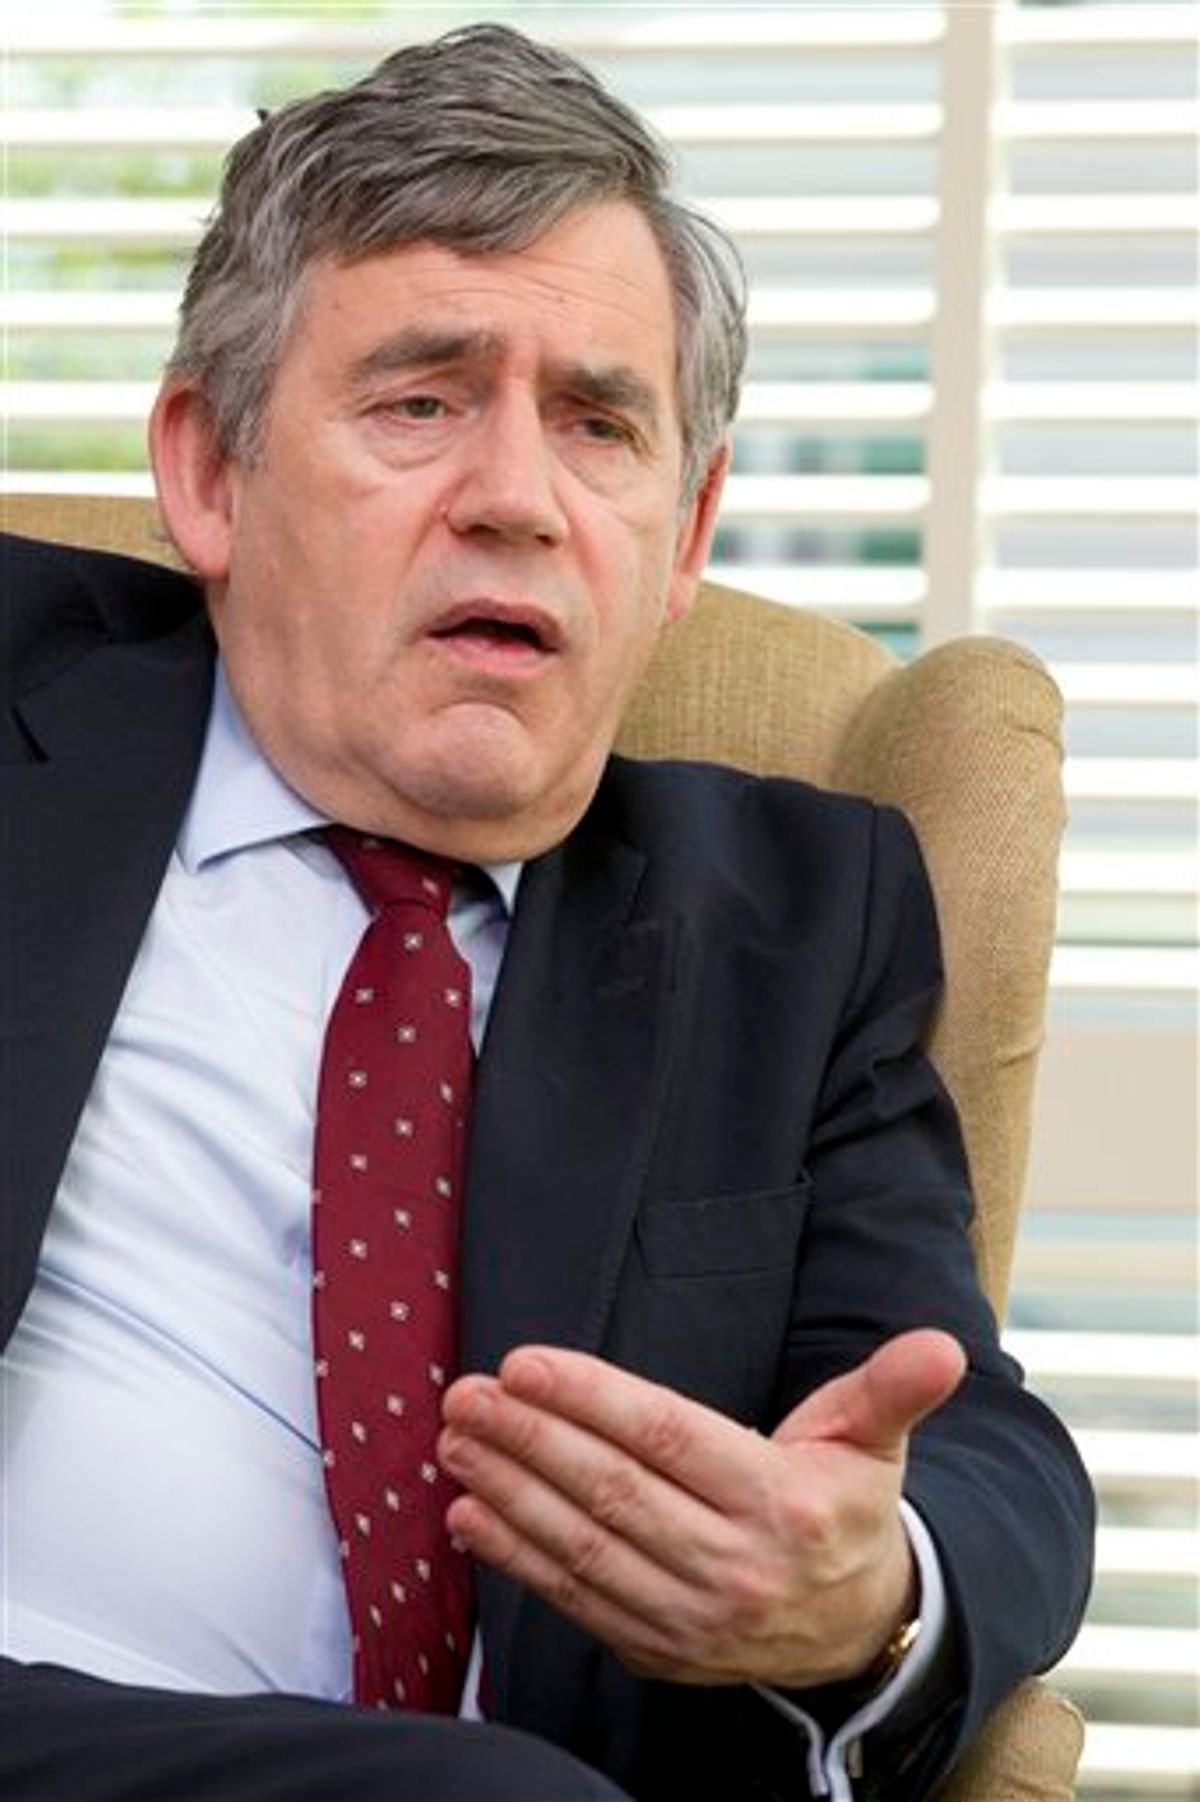 FILE - This is a Tuesday, April 5, 2011 file photo of former British Prime Minister Gordon Brown answers question during an interview with The  Associated Press in  Geneva, Switzerland.   British media say that former Prime Minister Gordon Brown had his personal information targeted by elements of Rupert Murdoch's media empire. (AP Photo/Salvatore Di Nolfi, File) (AP)